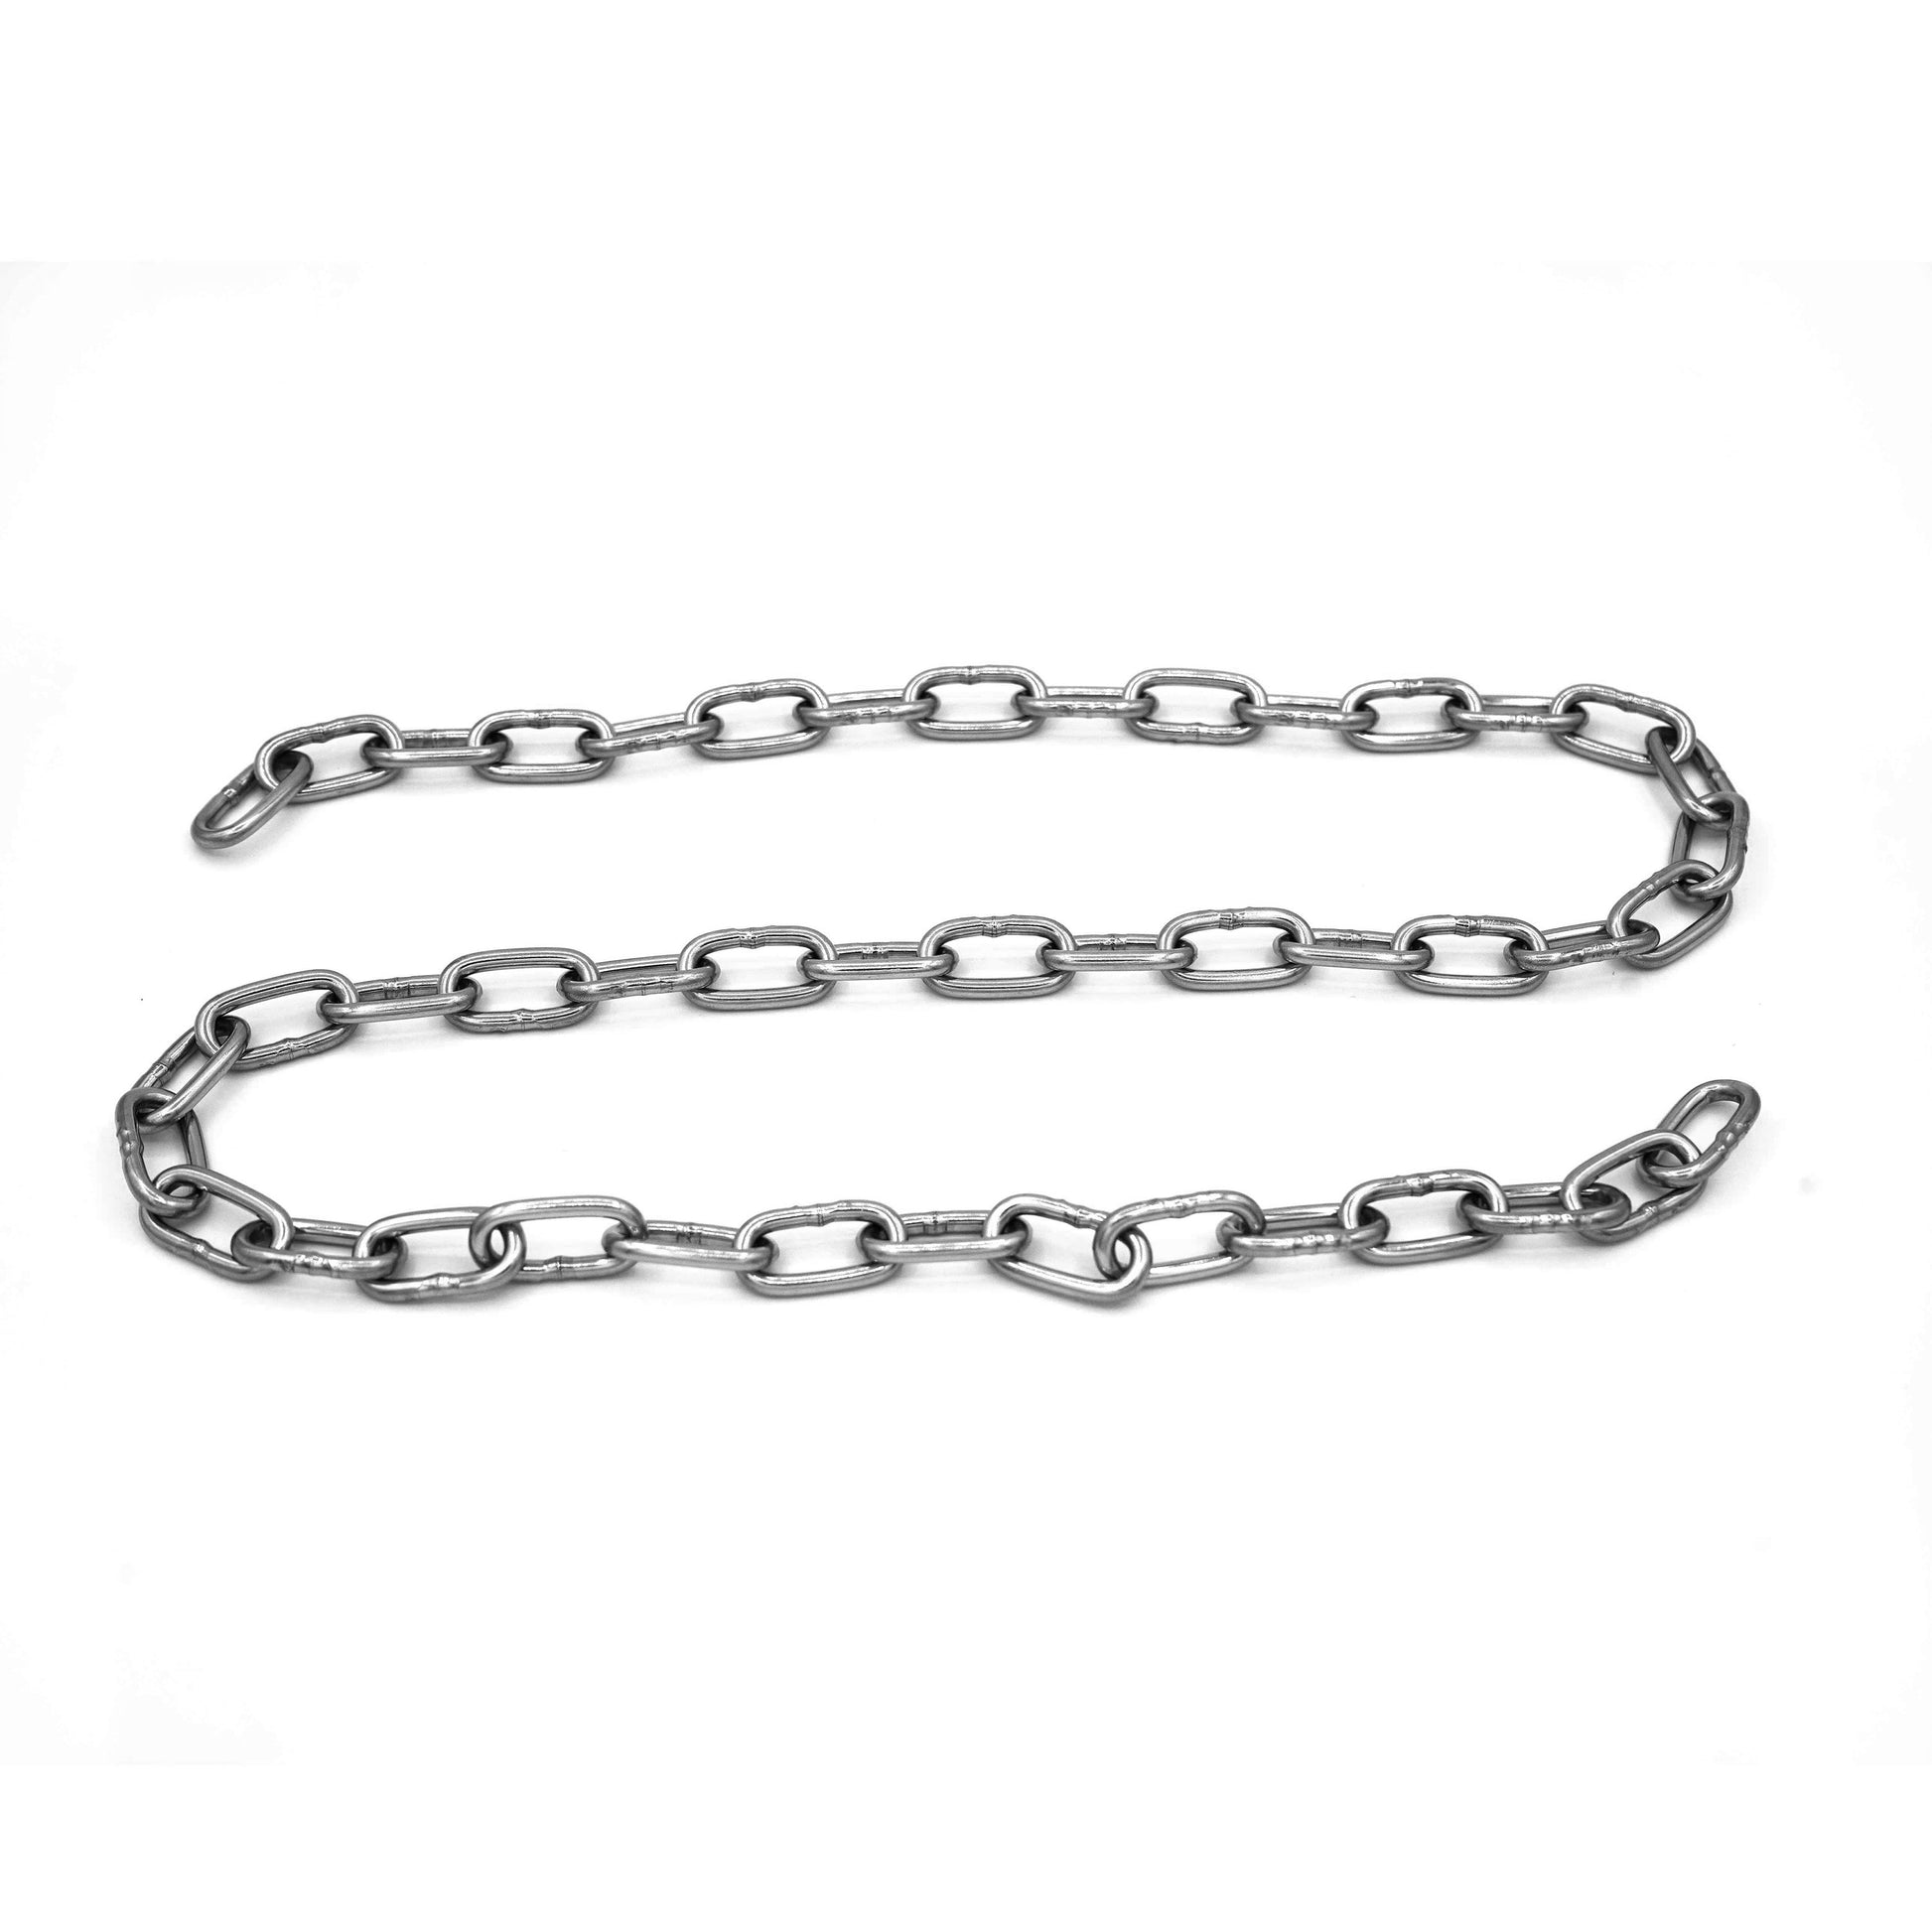 Custom stainless steel chain for bondage and selfbondage